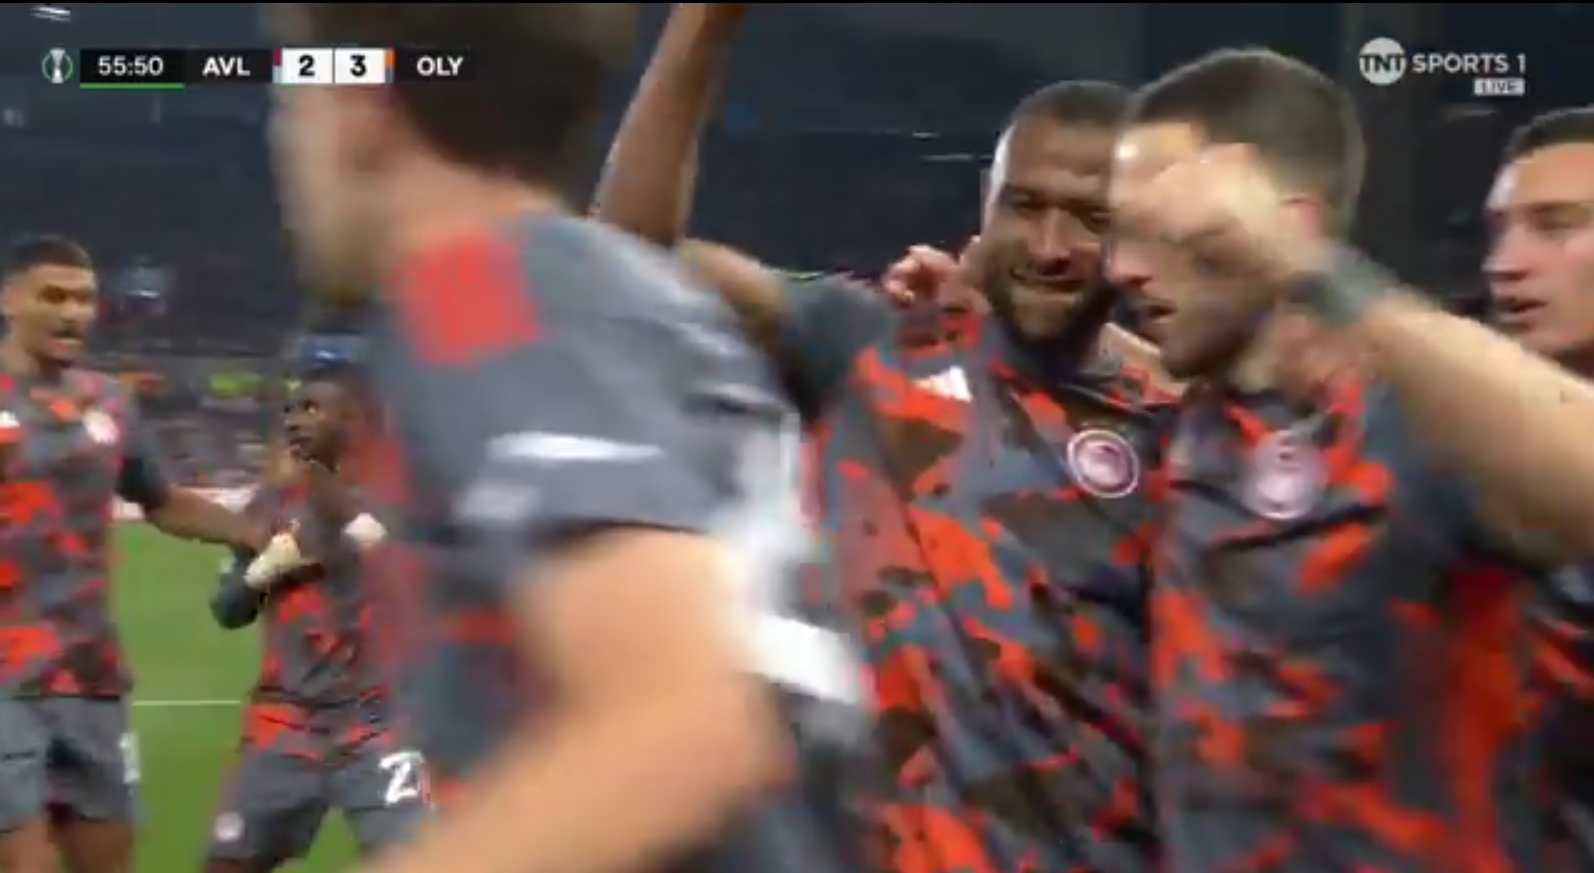 Video: Ayoub El Kaabi completes stunning hat-trick for Olympiacos against Aston Villa